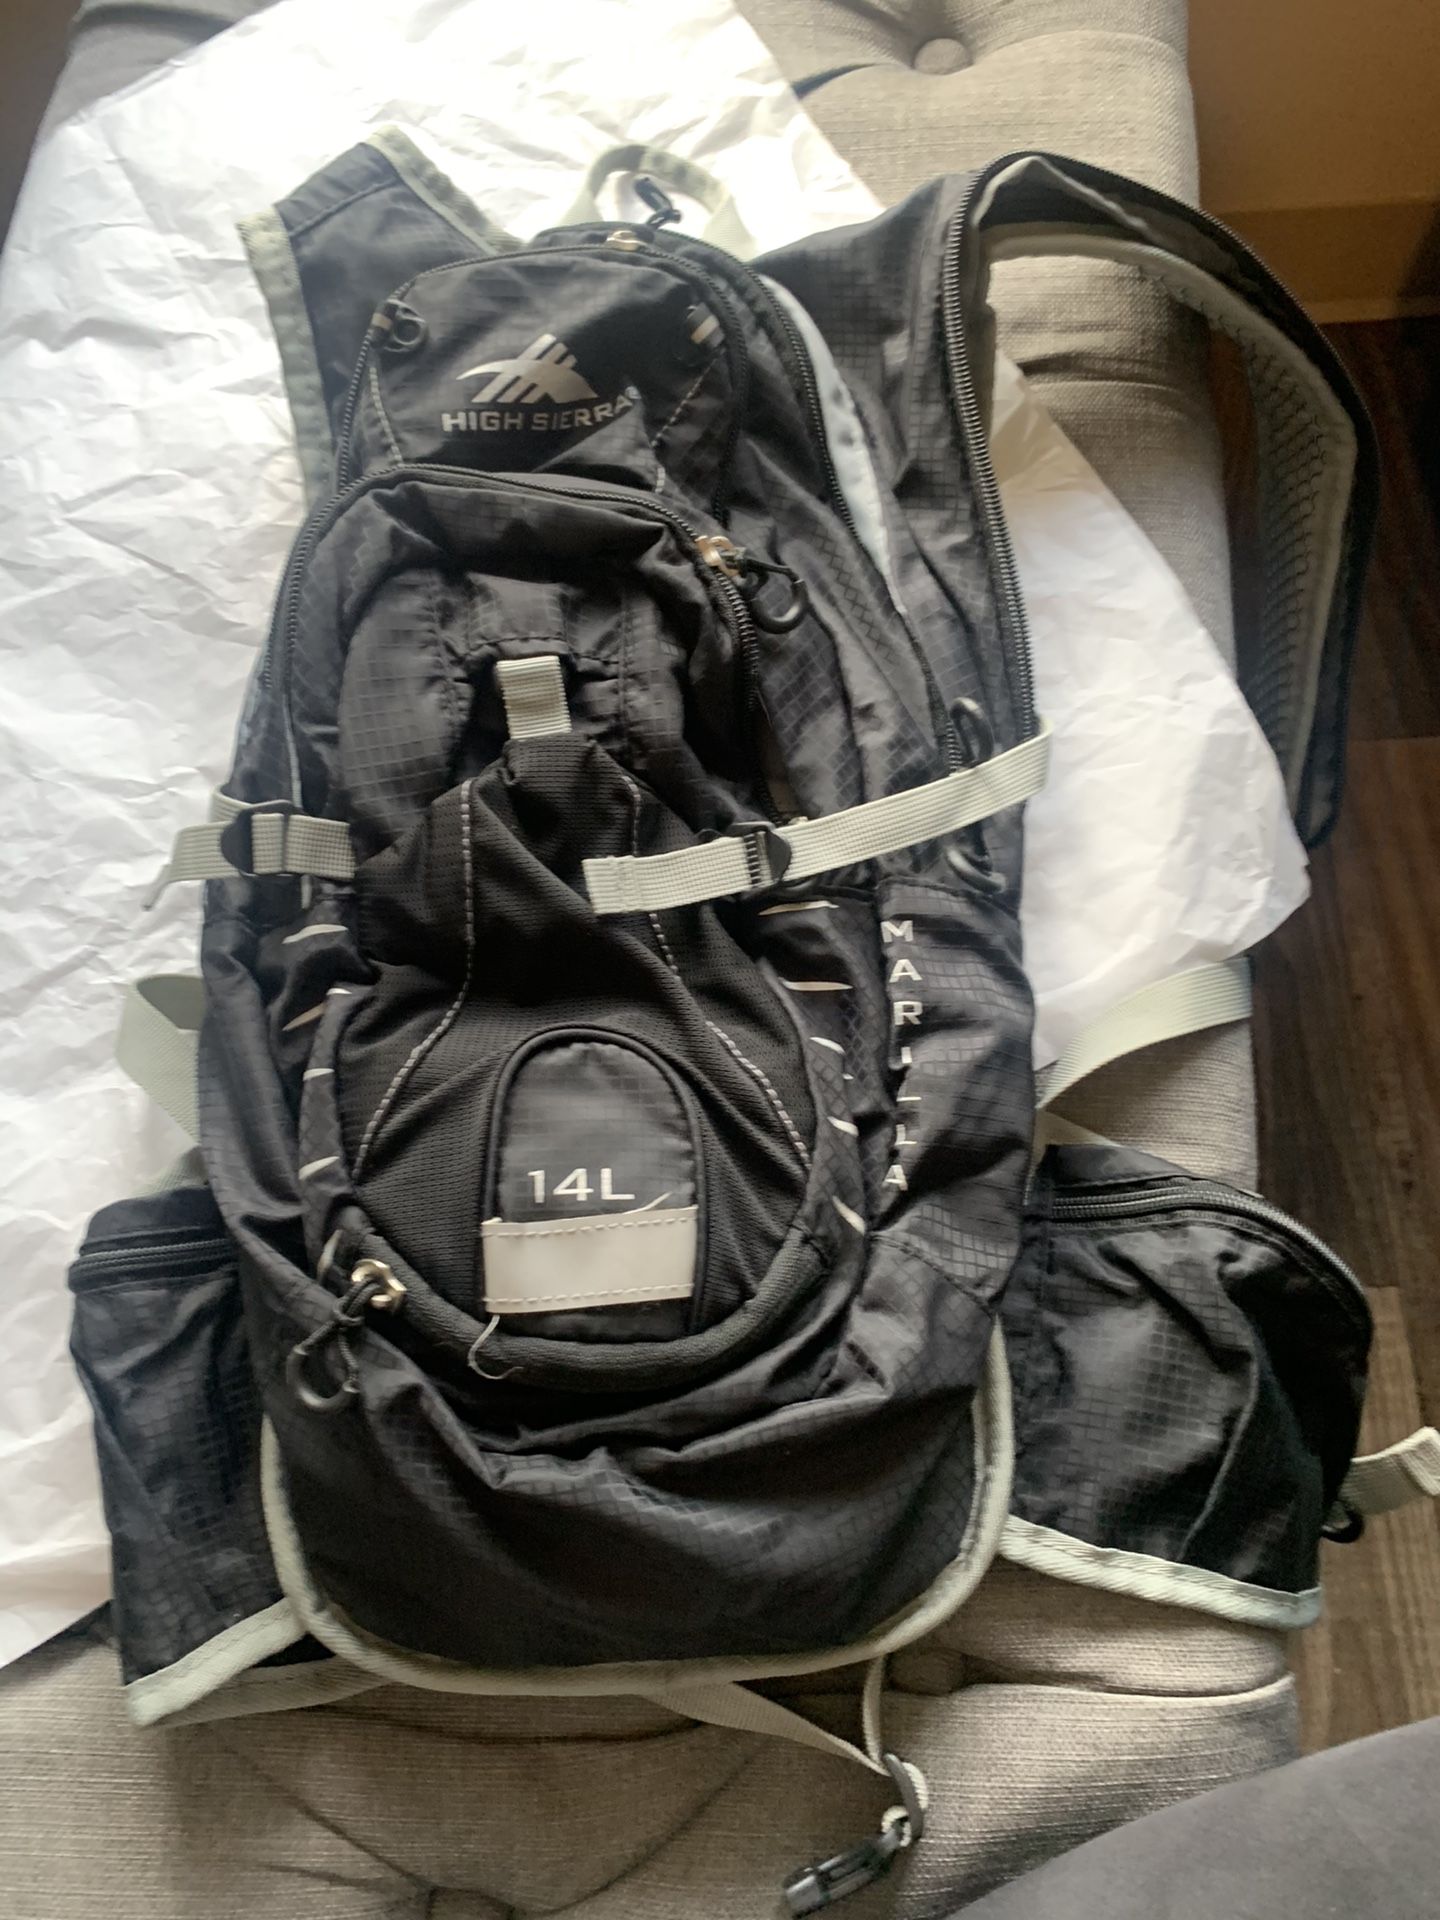 Hydration backpack with water bladder